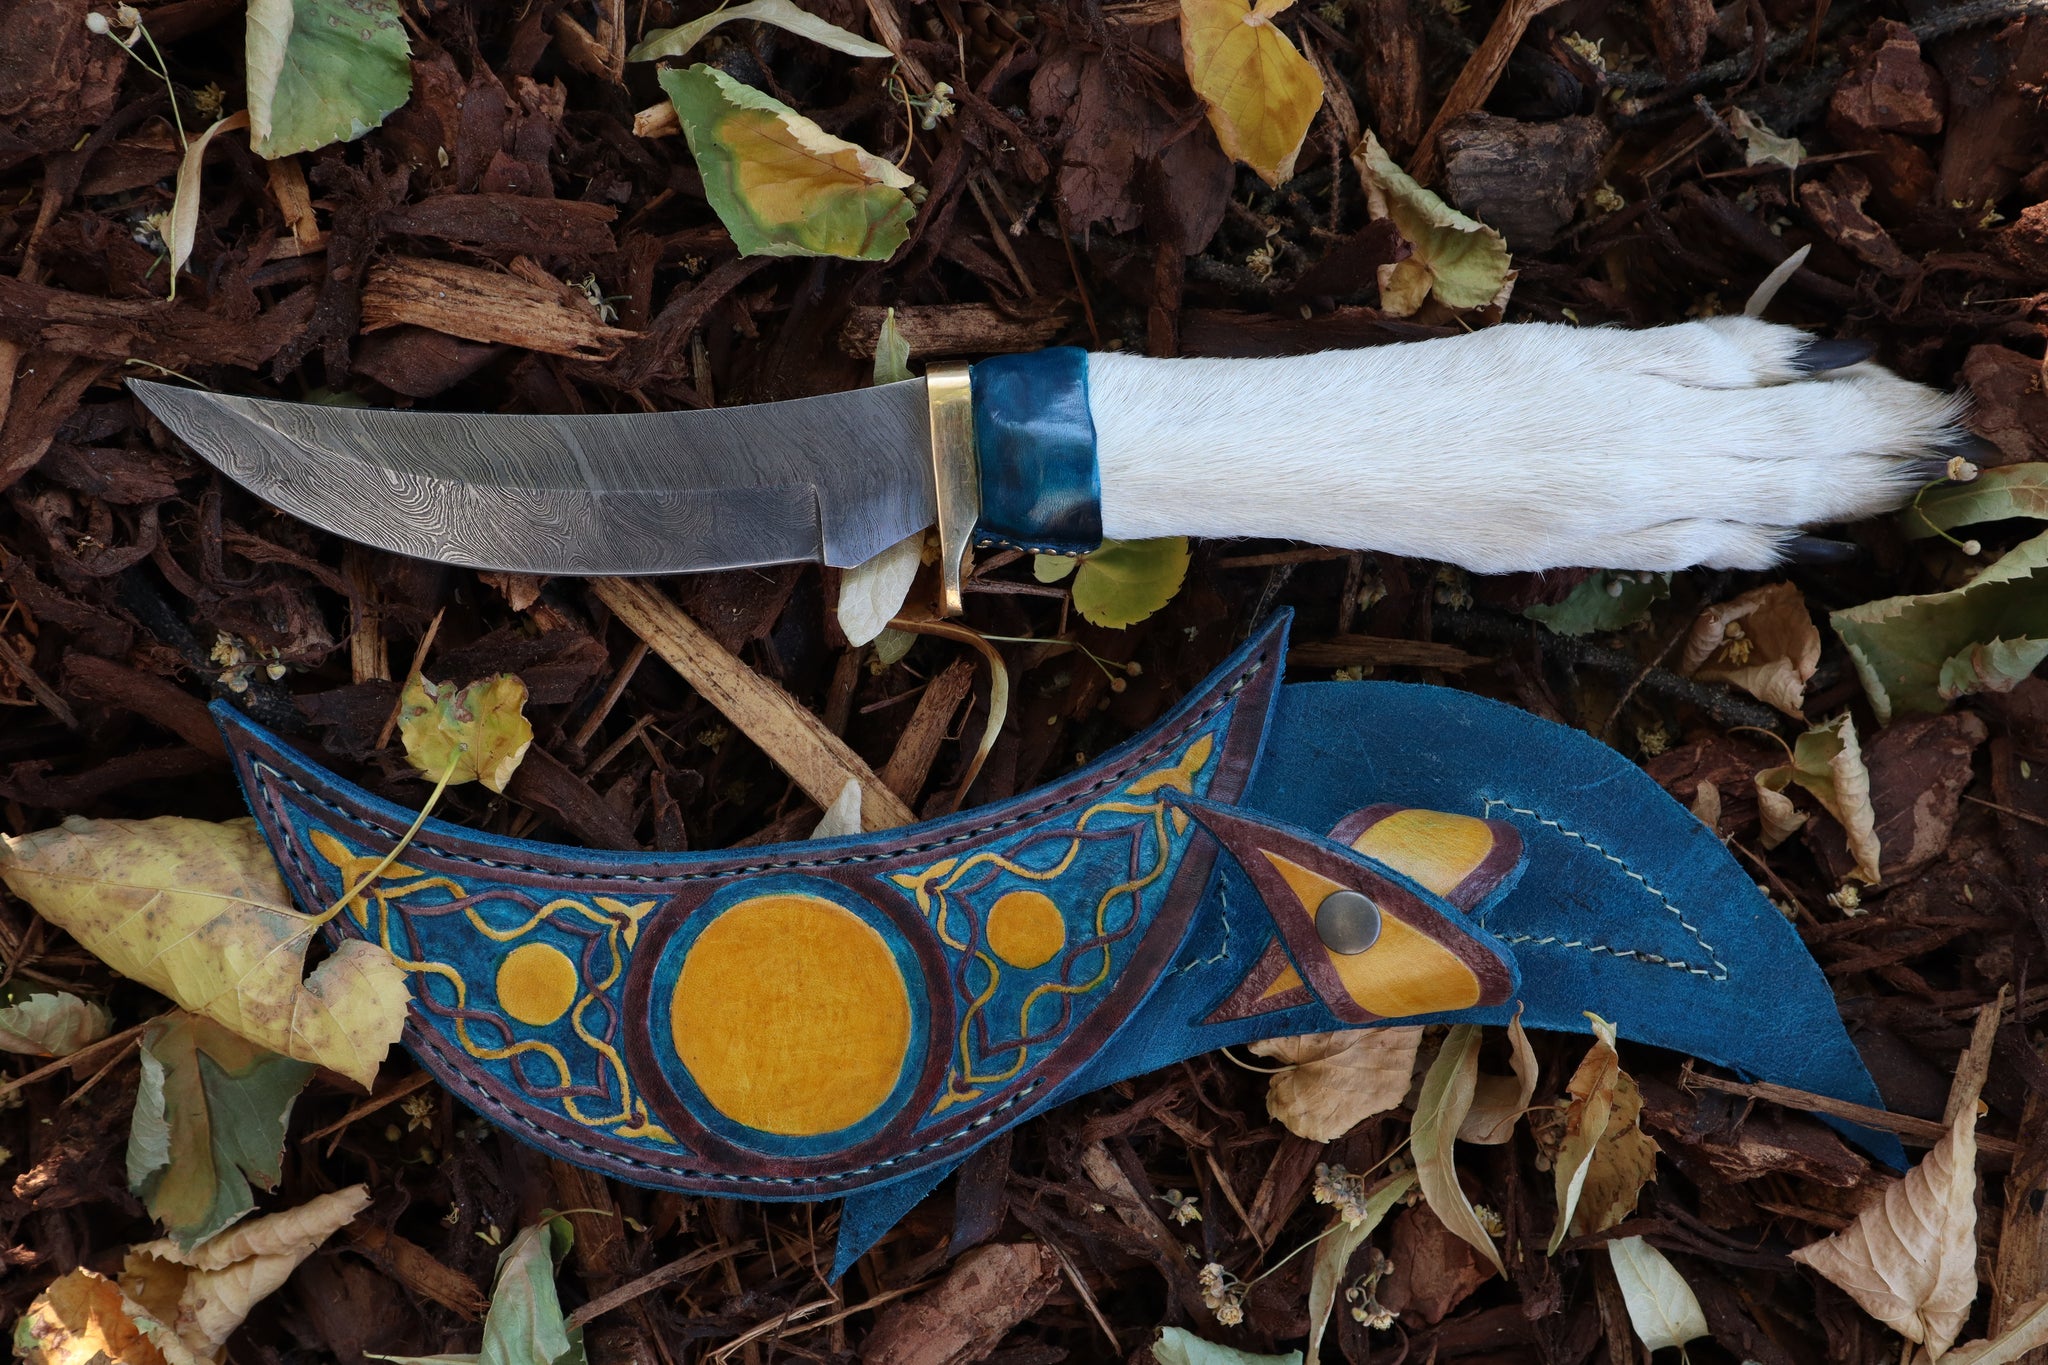 Damascus Gray Wolf Paw Knife with Crescent Moon Sheath